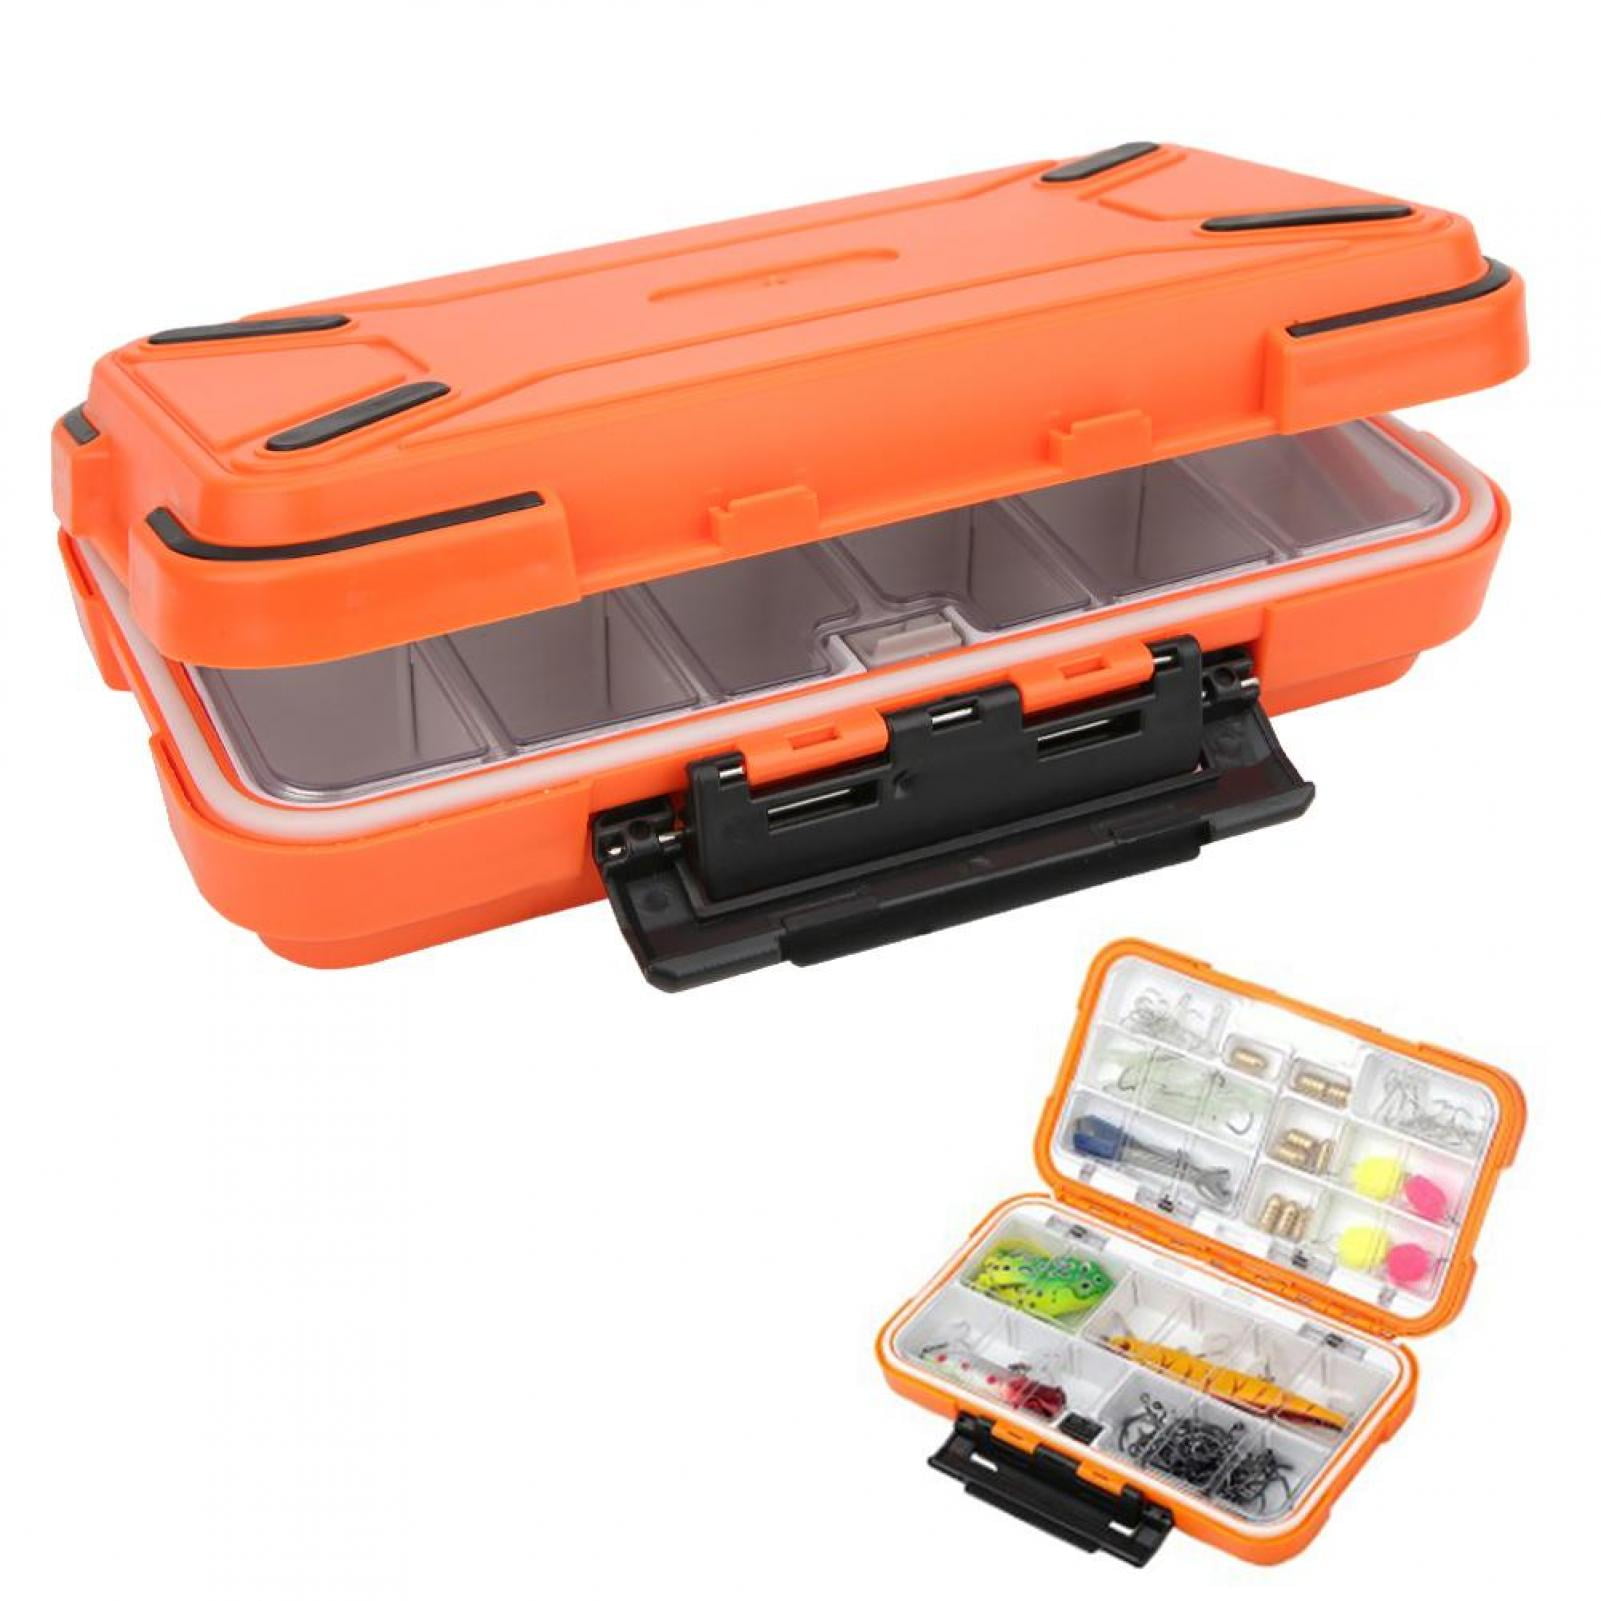 Plano Fishing Large 3-Tray Tackle Box with Top Access, Graphite/ Sandstone  - Walmart.com